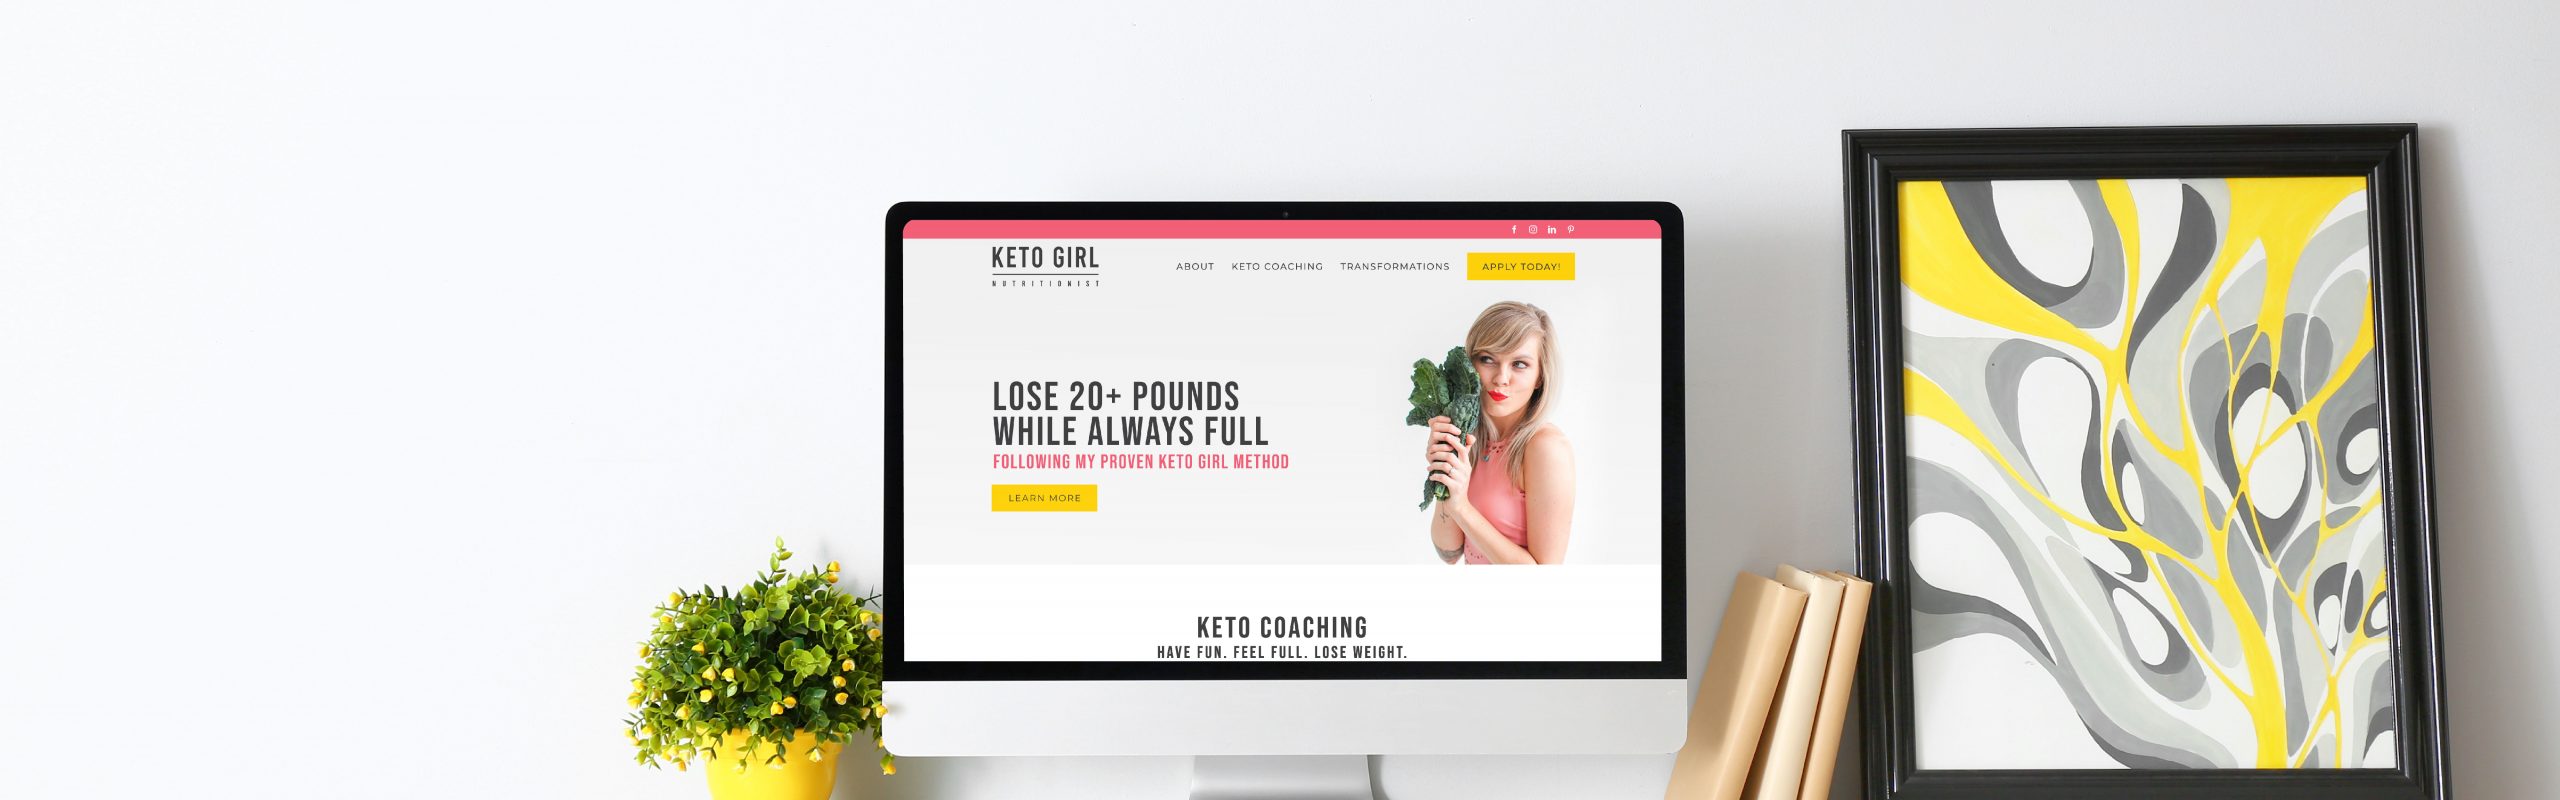 A computer monitor displaying a weight loss program advertisement titled "Keto Diet" with a nutritionist holding a measuring tape around her waist on a clean desk, accompanied by a framed piece of art.